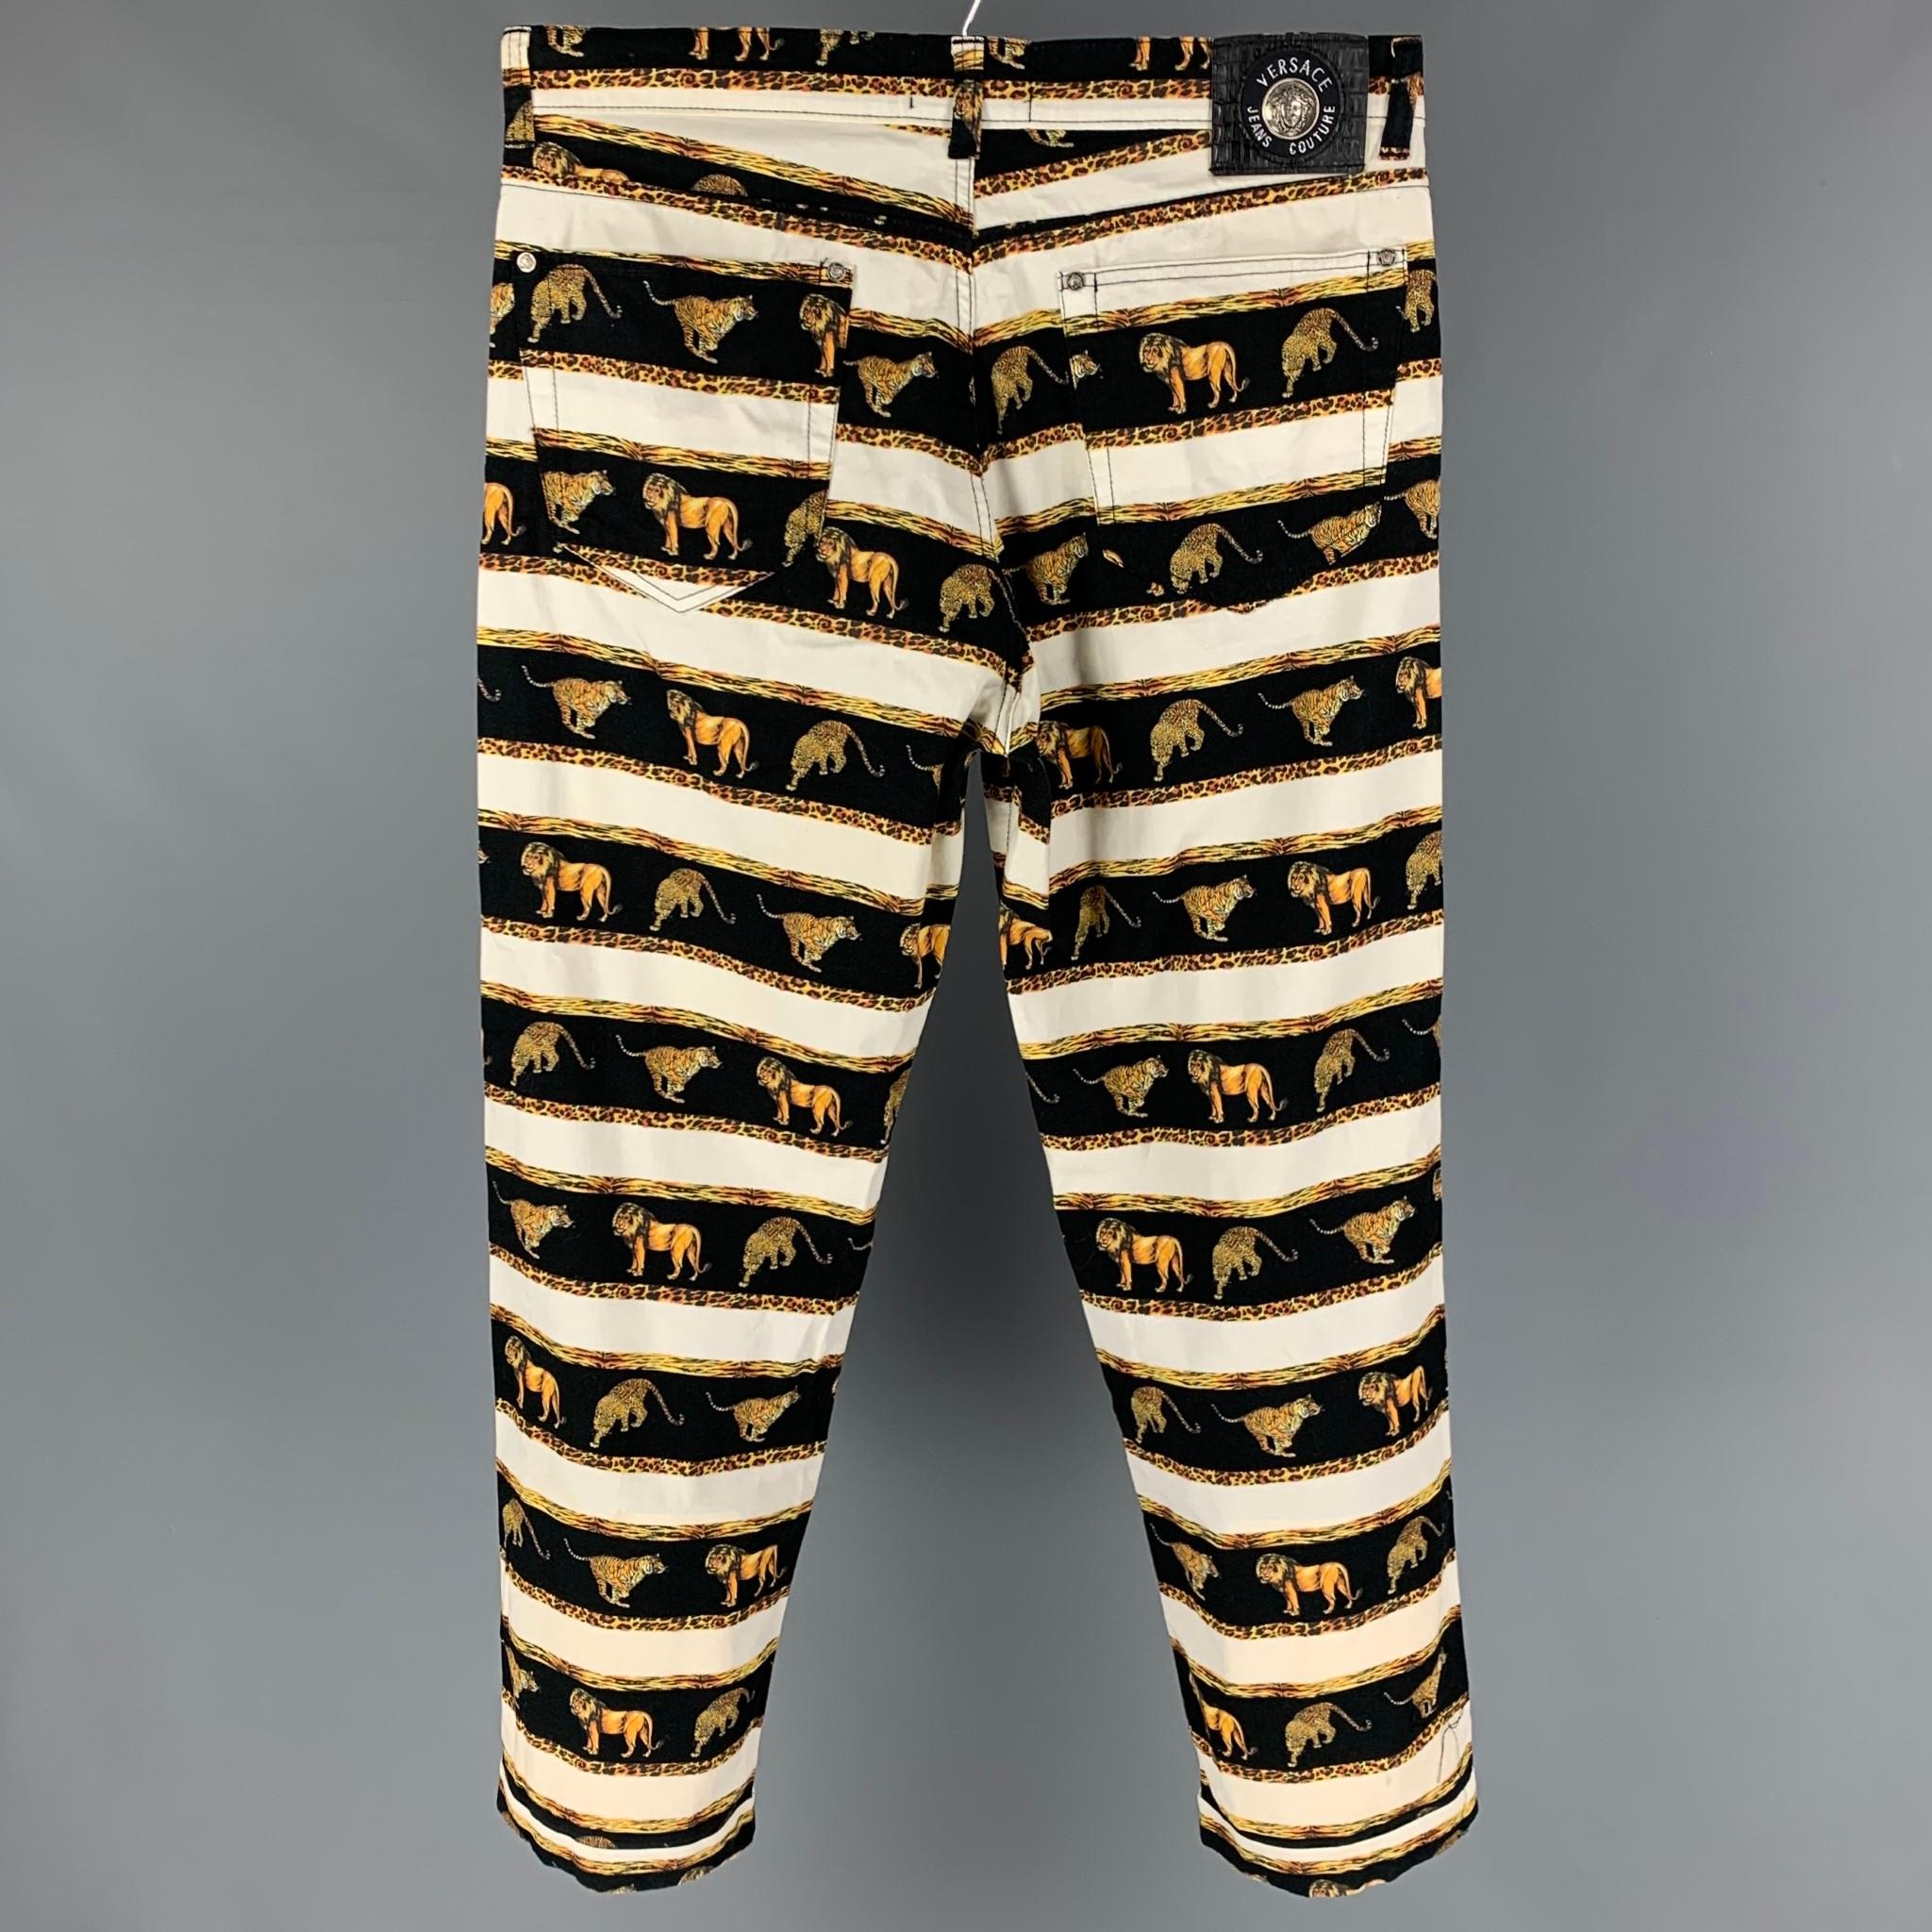 VERSACE JEANS COUTURE pants comes in a white & black cotton with a all over stripe animal print design featuring silver tone medusa head buttons, contrast stitching, and a button fly closure. 

Good Pre-Owned Condition. Moderate discoloration at